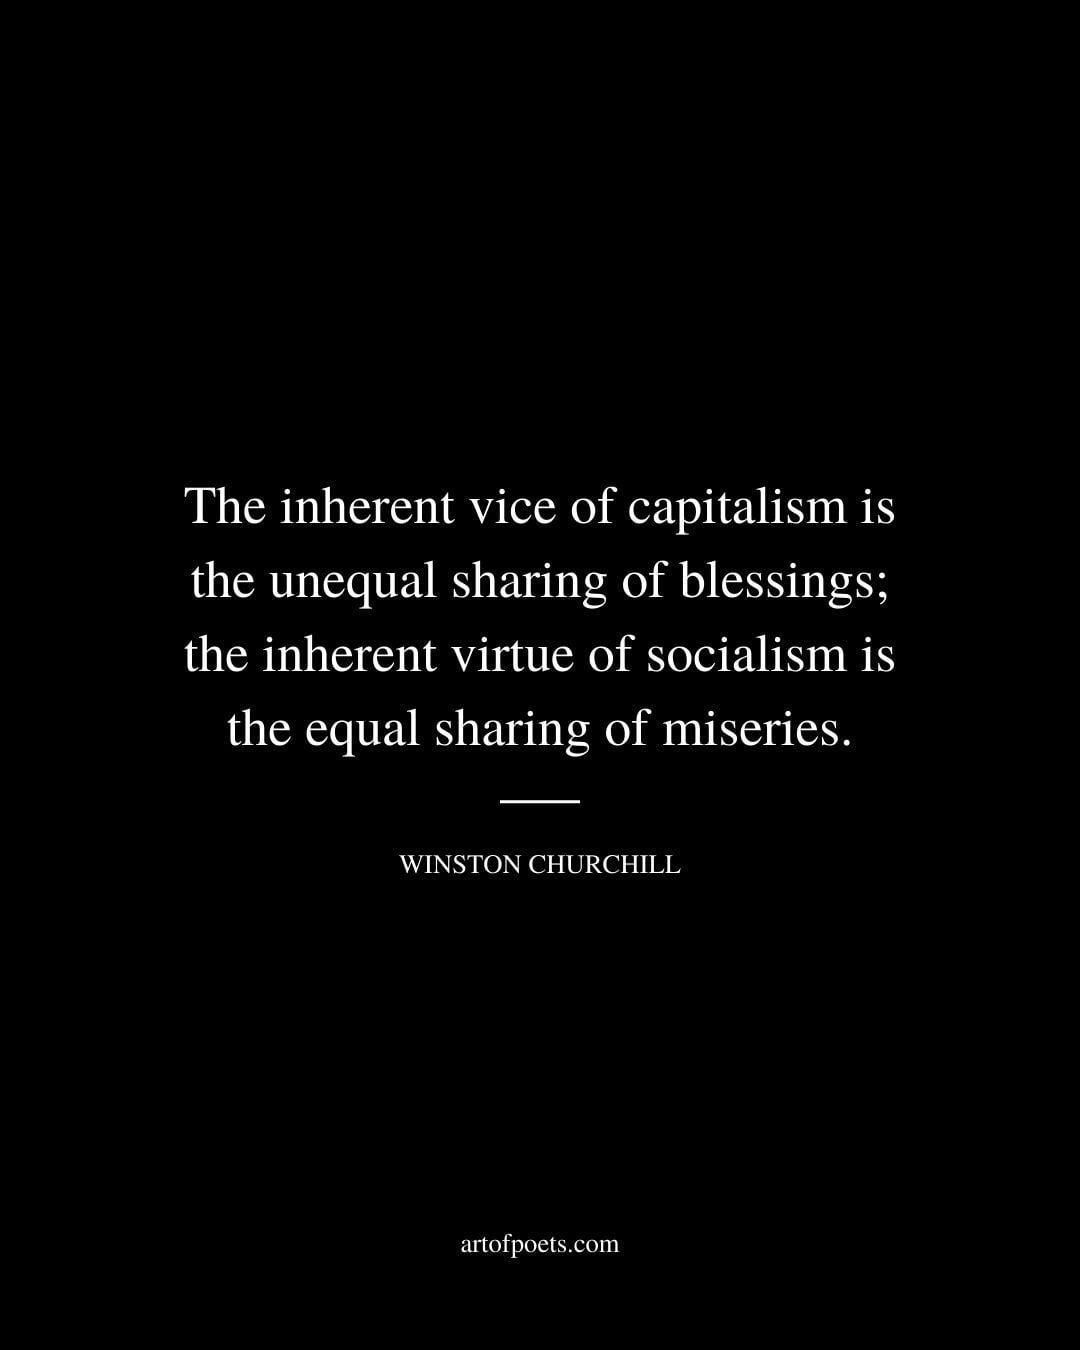 The inherent vice of capitalism is the unequal sharing of blessings the inherent virtue of socialism is the equal sharing of miseries